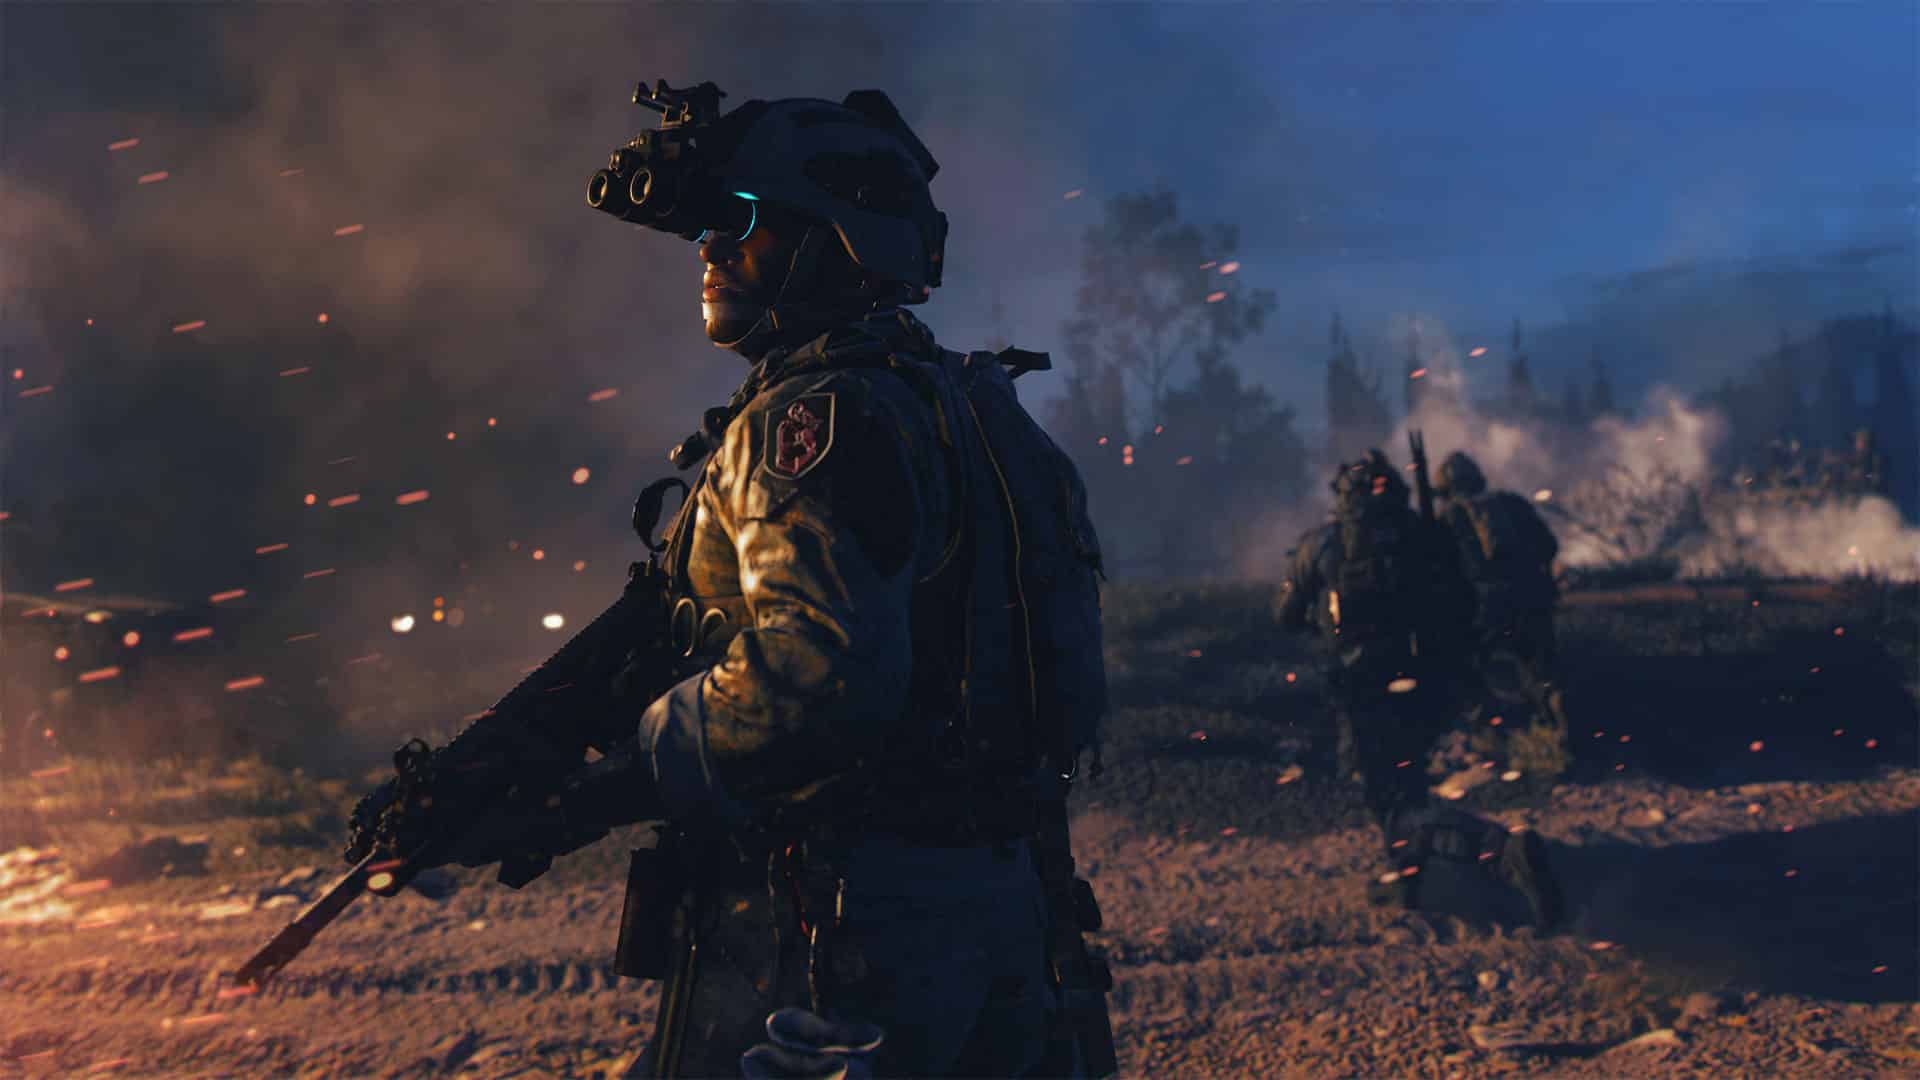 List of major video games with August-December 2022 release date - Call of Duty: Modern Warfare II